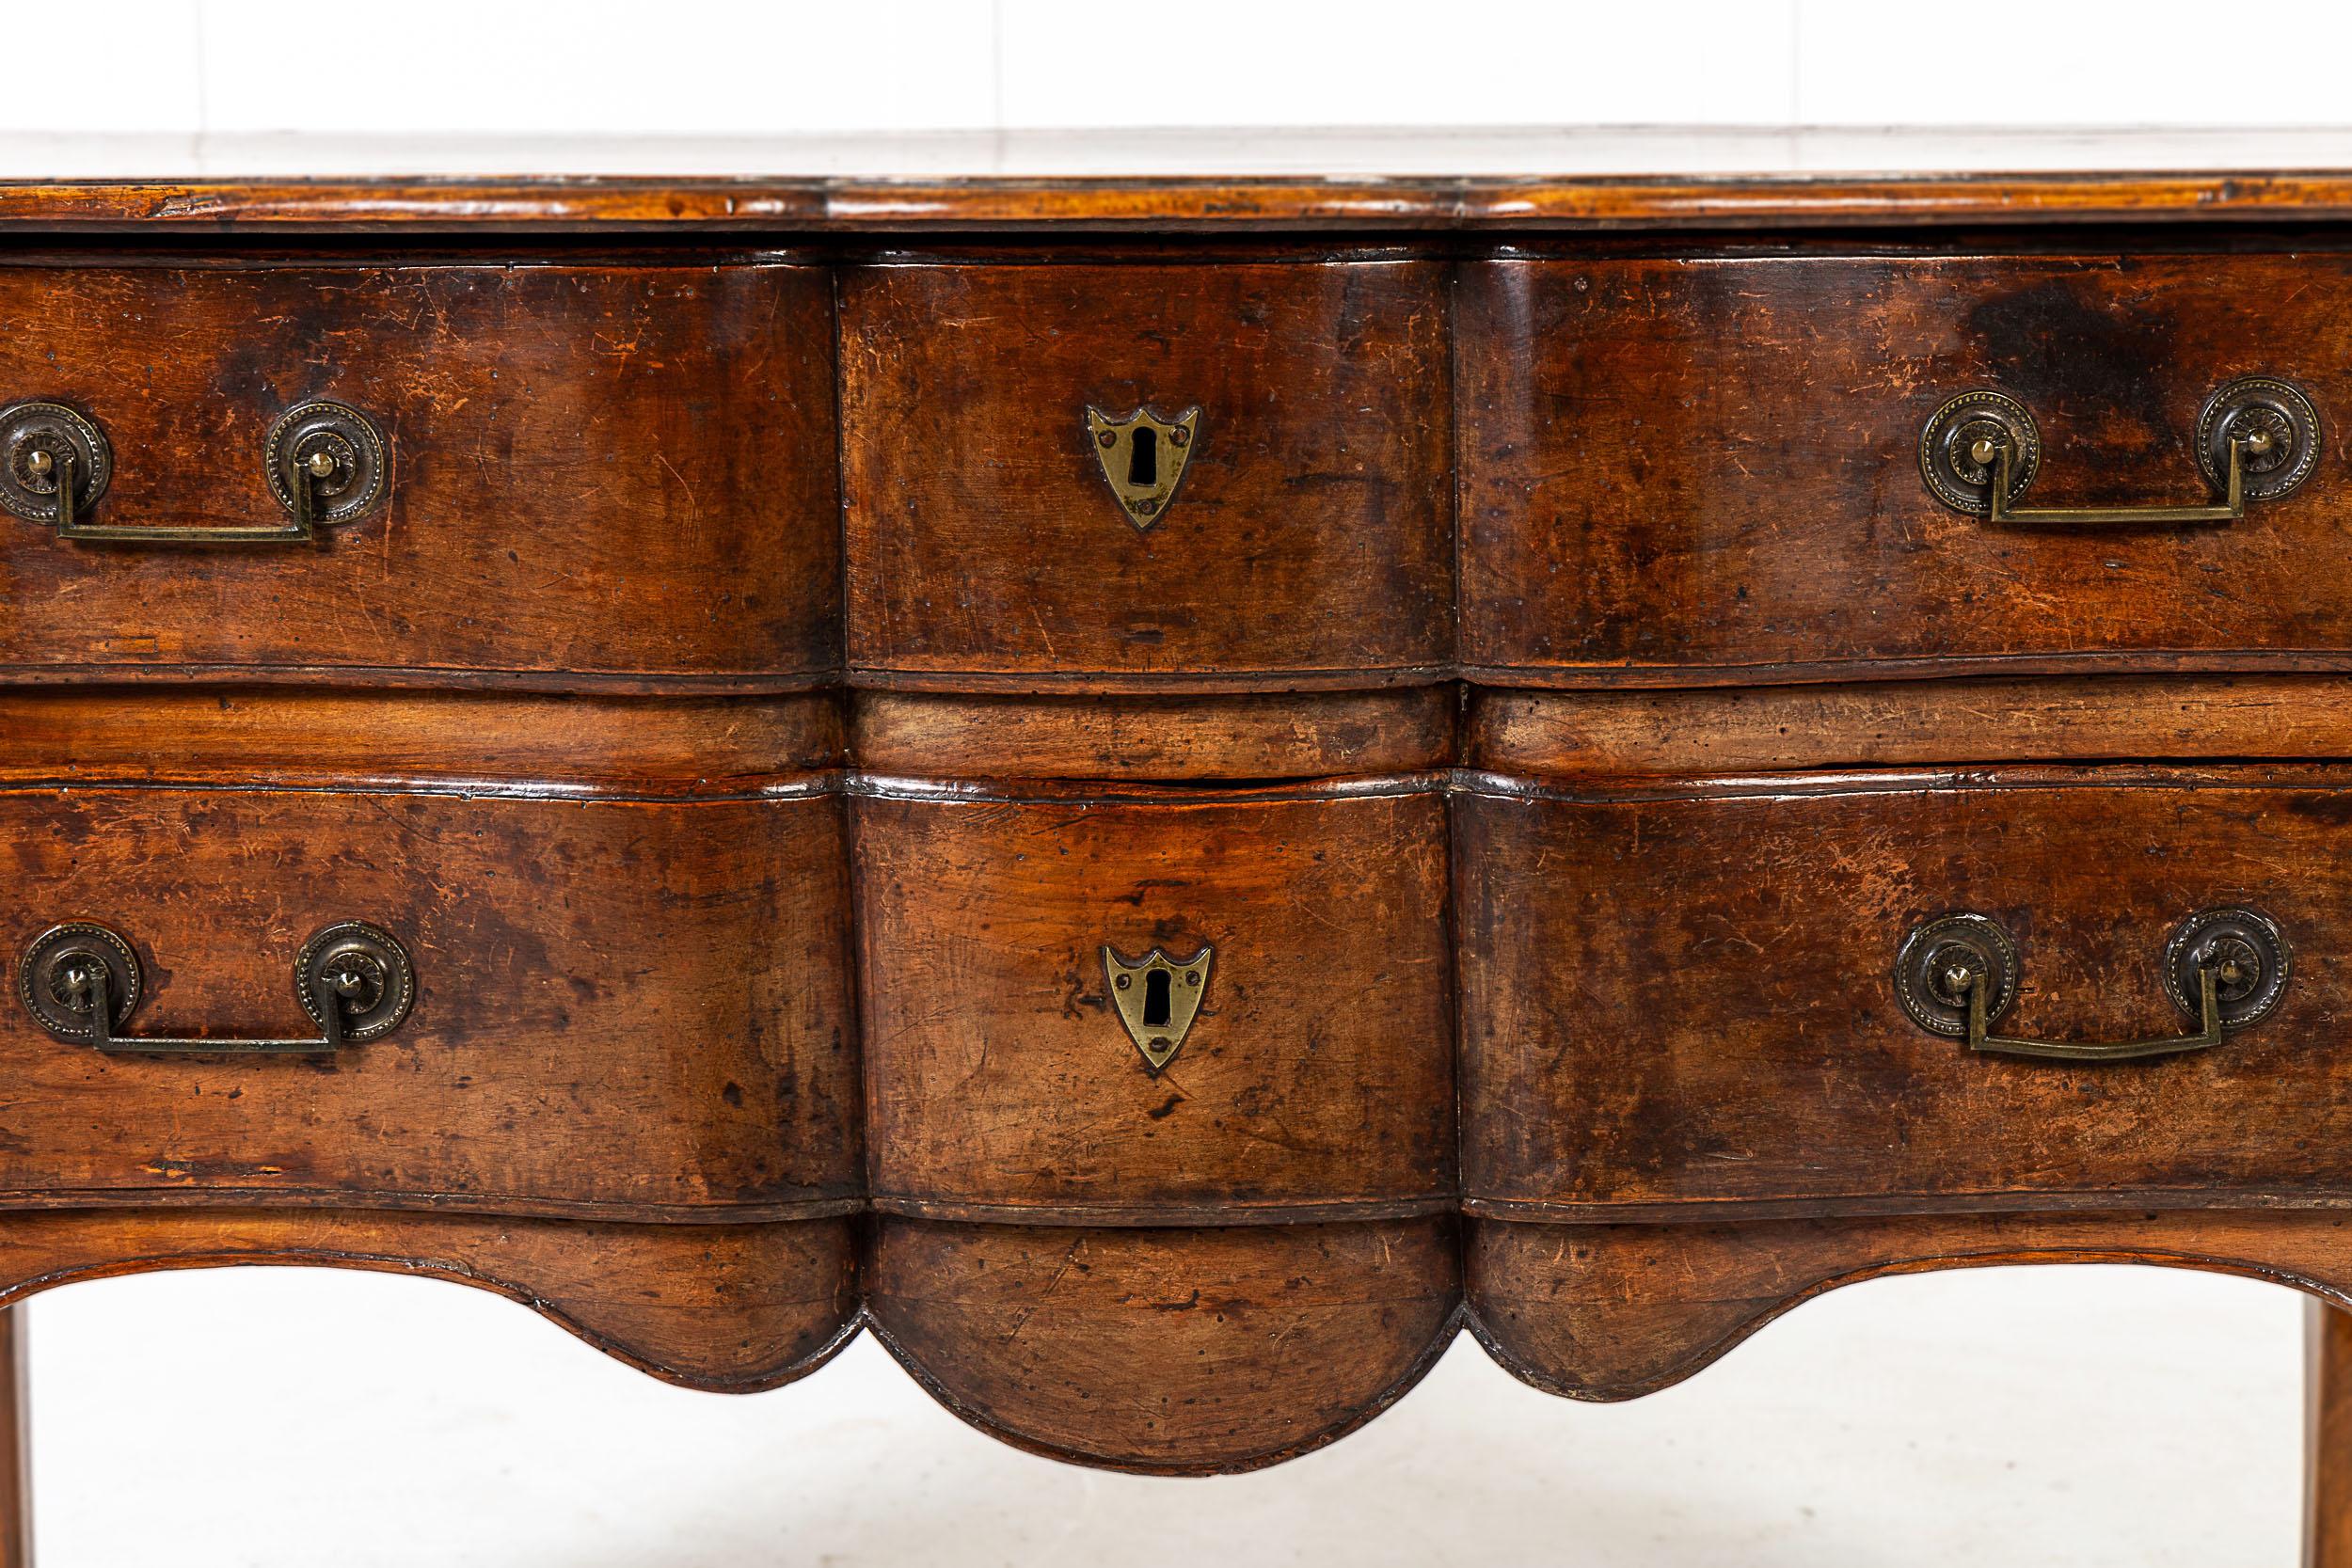 18th Century French walnut serpentine commode having two drawers standing shapely curved legs.
Great patination